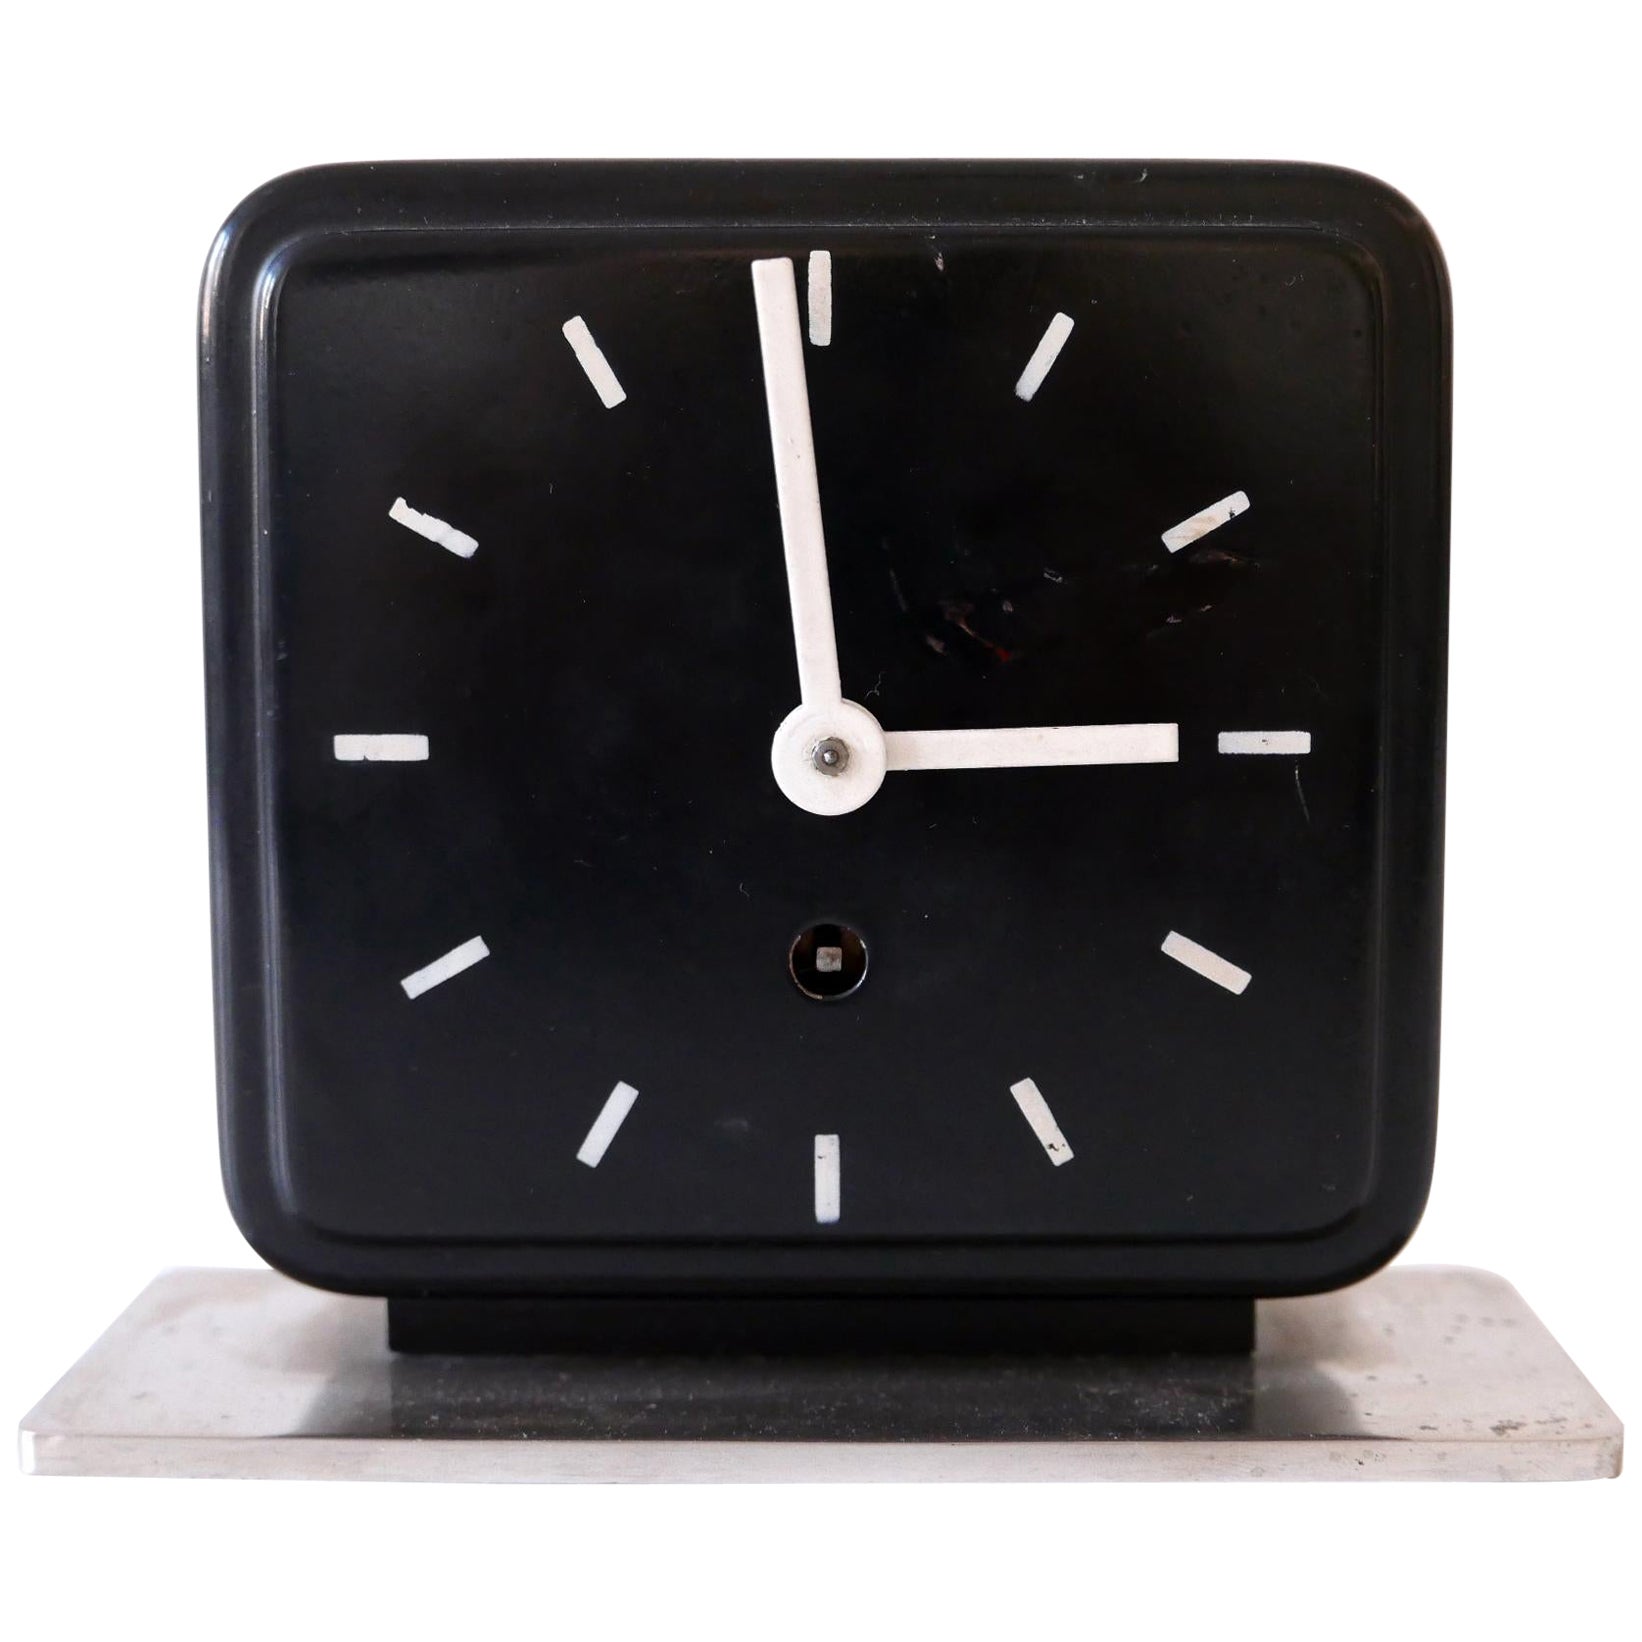 Bauhaus Table or Desk Clock by Marianne Brandt for Ruppelwerk Gotha Germany 1932 For Sale